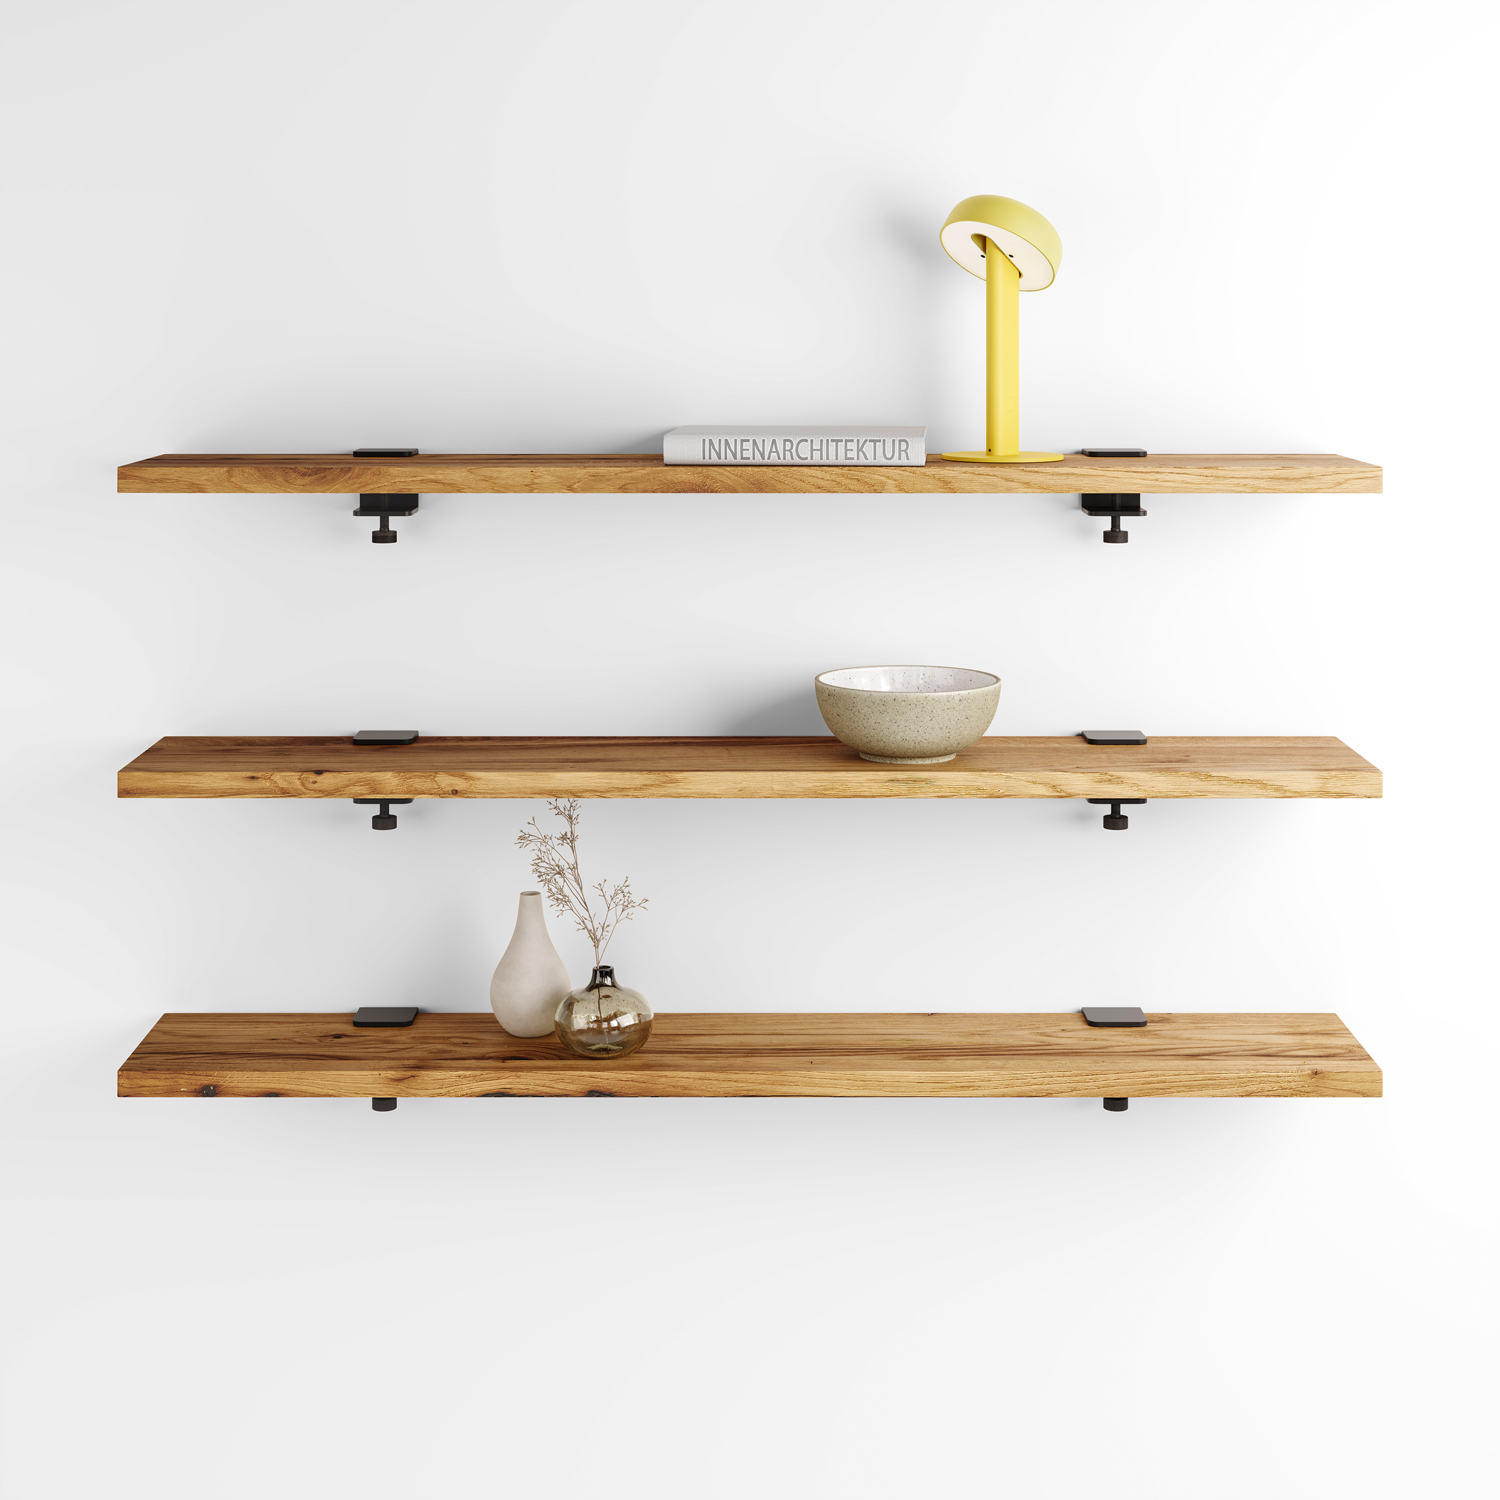 Set of 3 reclaimed wood wall shelves - 60 to 150 cm